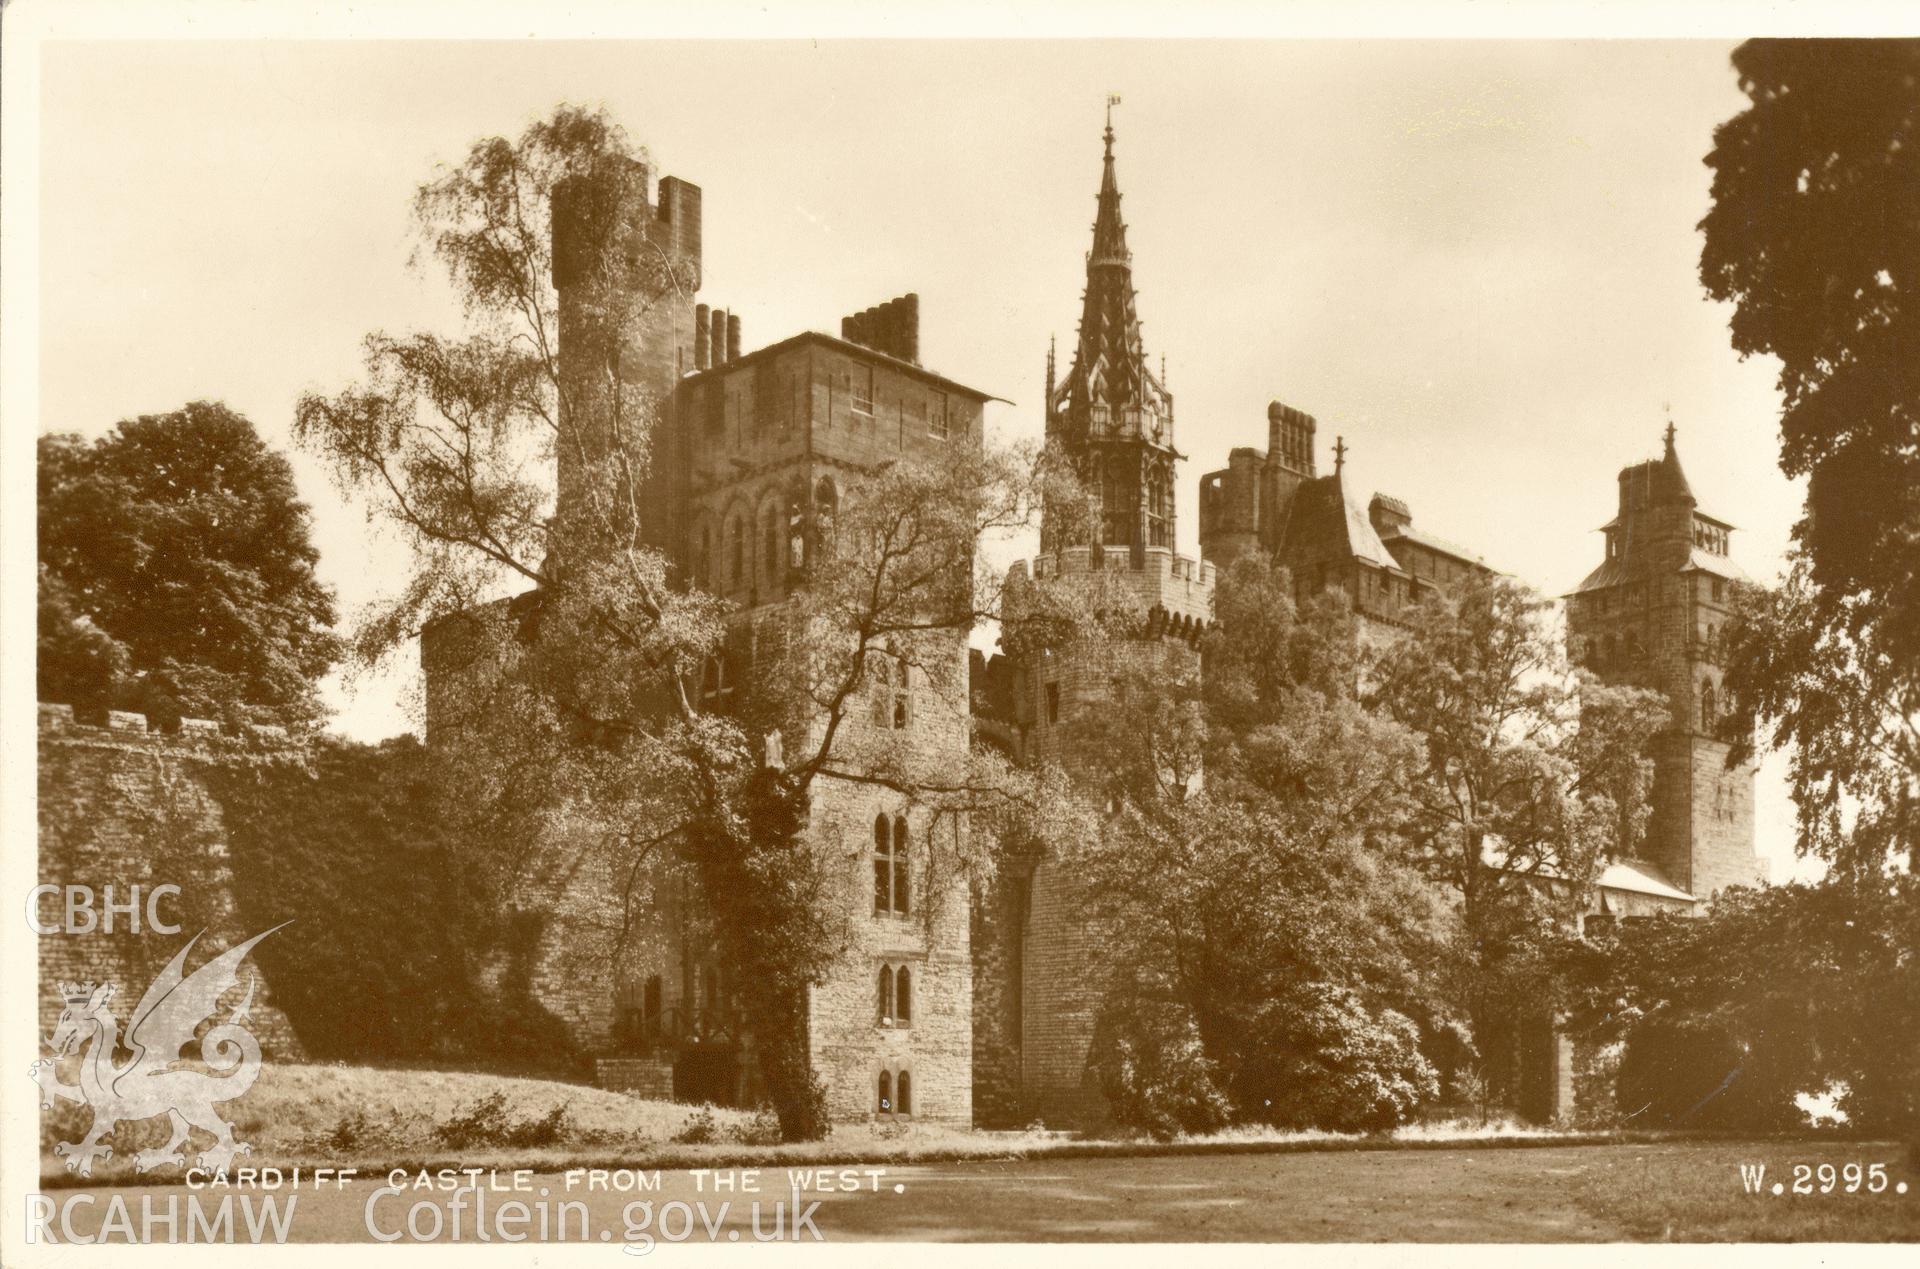 Digitised postcard image of Cardiff Castle from the west, Valentine's Series. Produced by Parks and Gardens Data Services, from an original item in the Peter Davis Collection at Parks and Gardens UK. We hold only web-resolution images of this collection, suitable for viewing on screen and for research purposes only. We do not hold the original images, or publication quality scans.